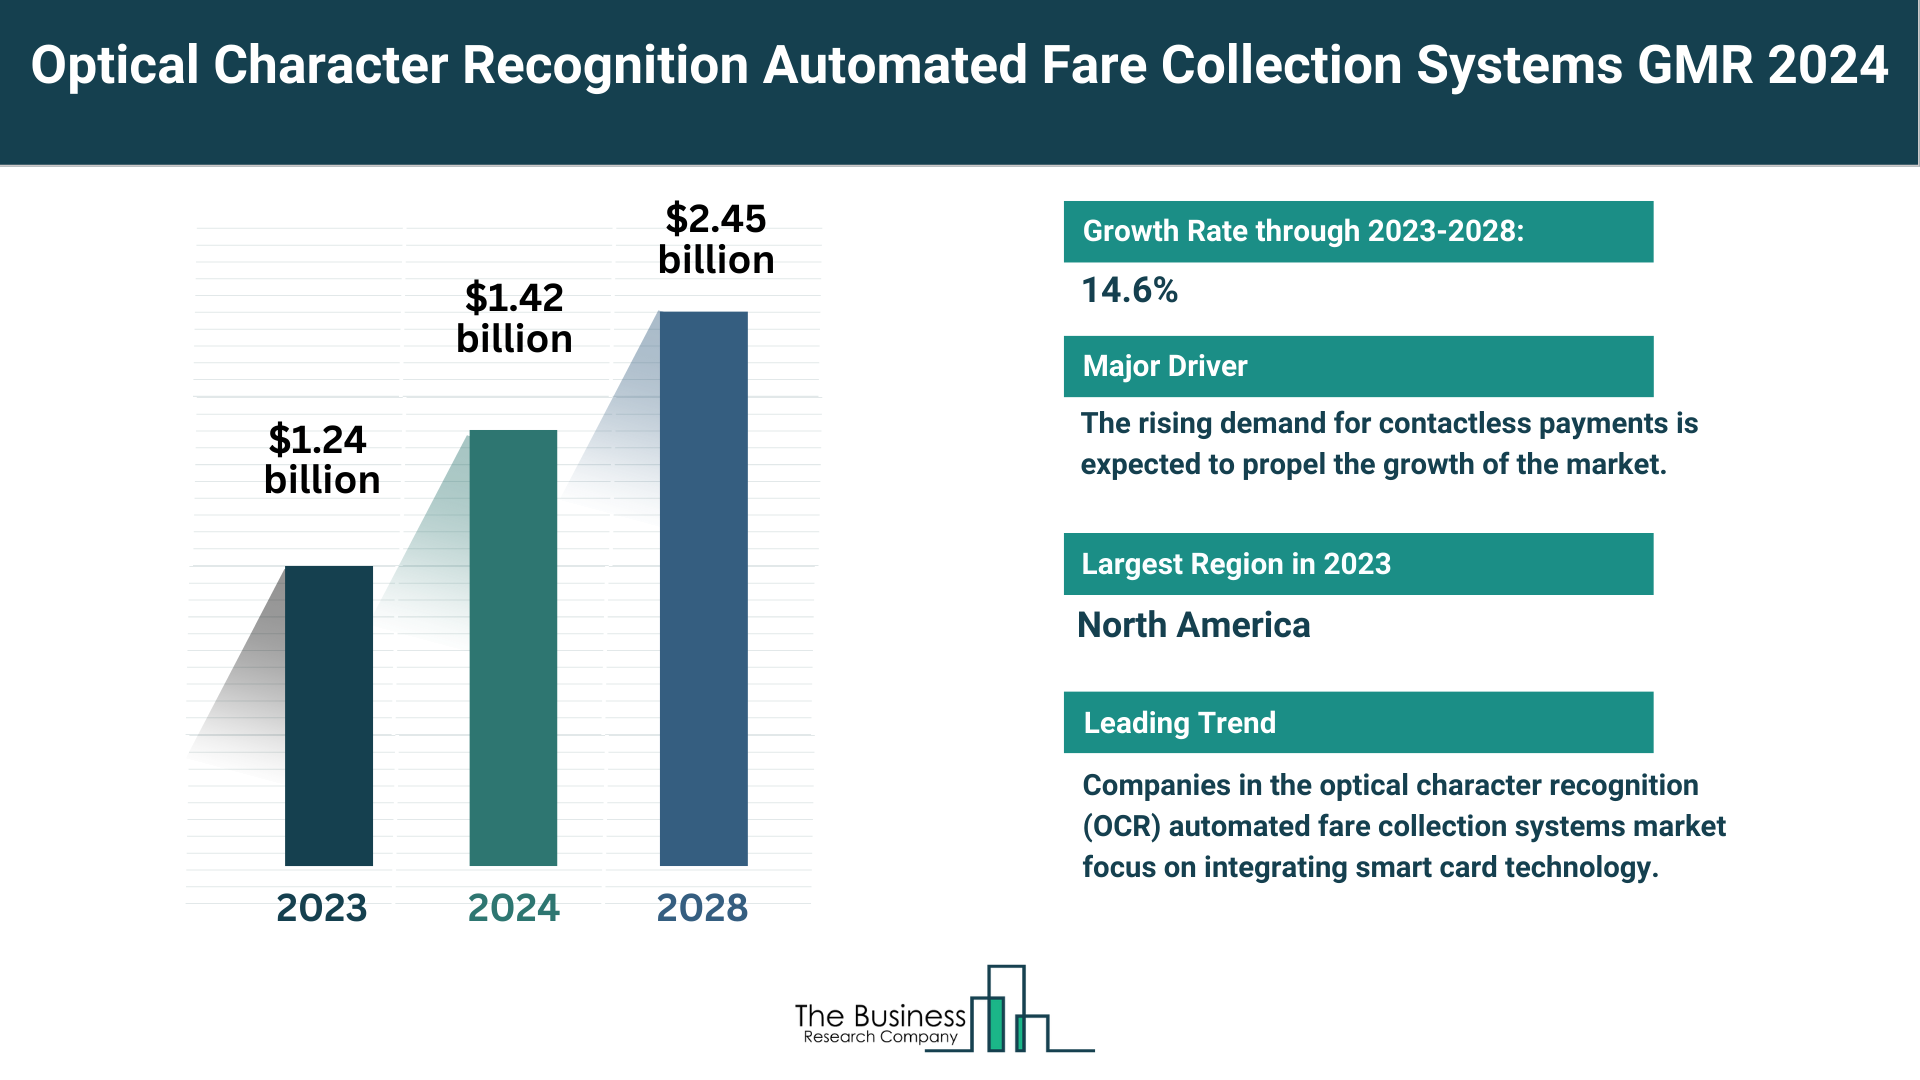 Global Optical Character Recognition (OCR) Automated Fare Collection Systems Market